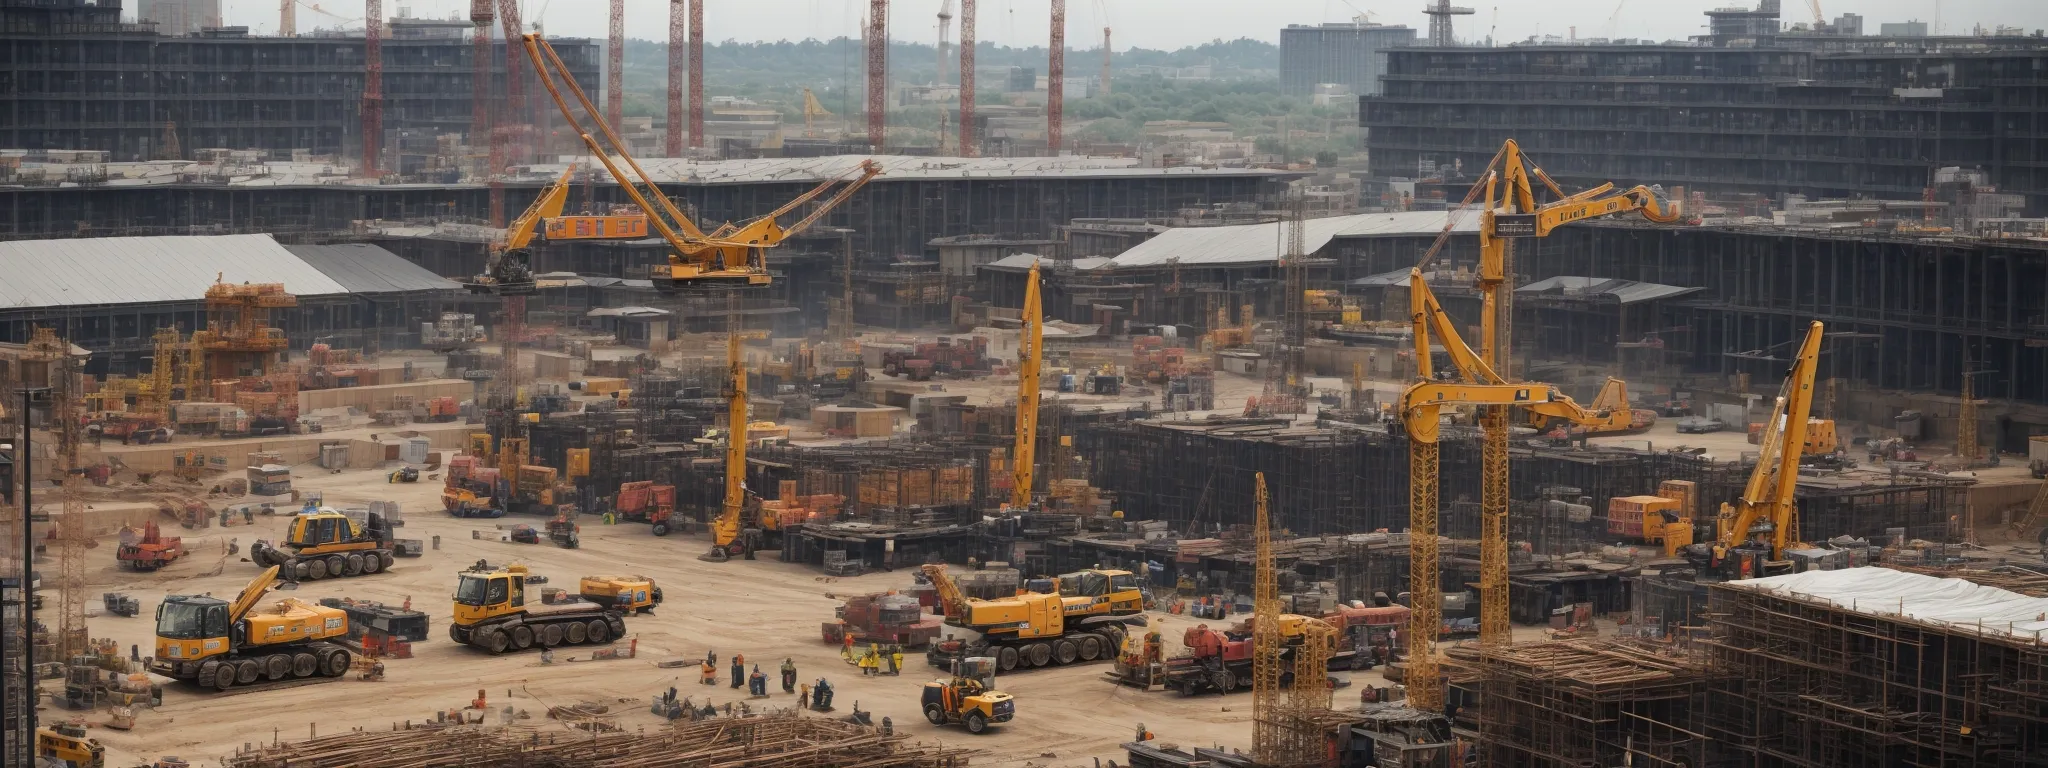 a broad view of a busy construction site with workers wearing hard hats and visibility vests amidst towering cranes and scaffoldings, illustrating adherence to safety standards.